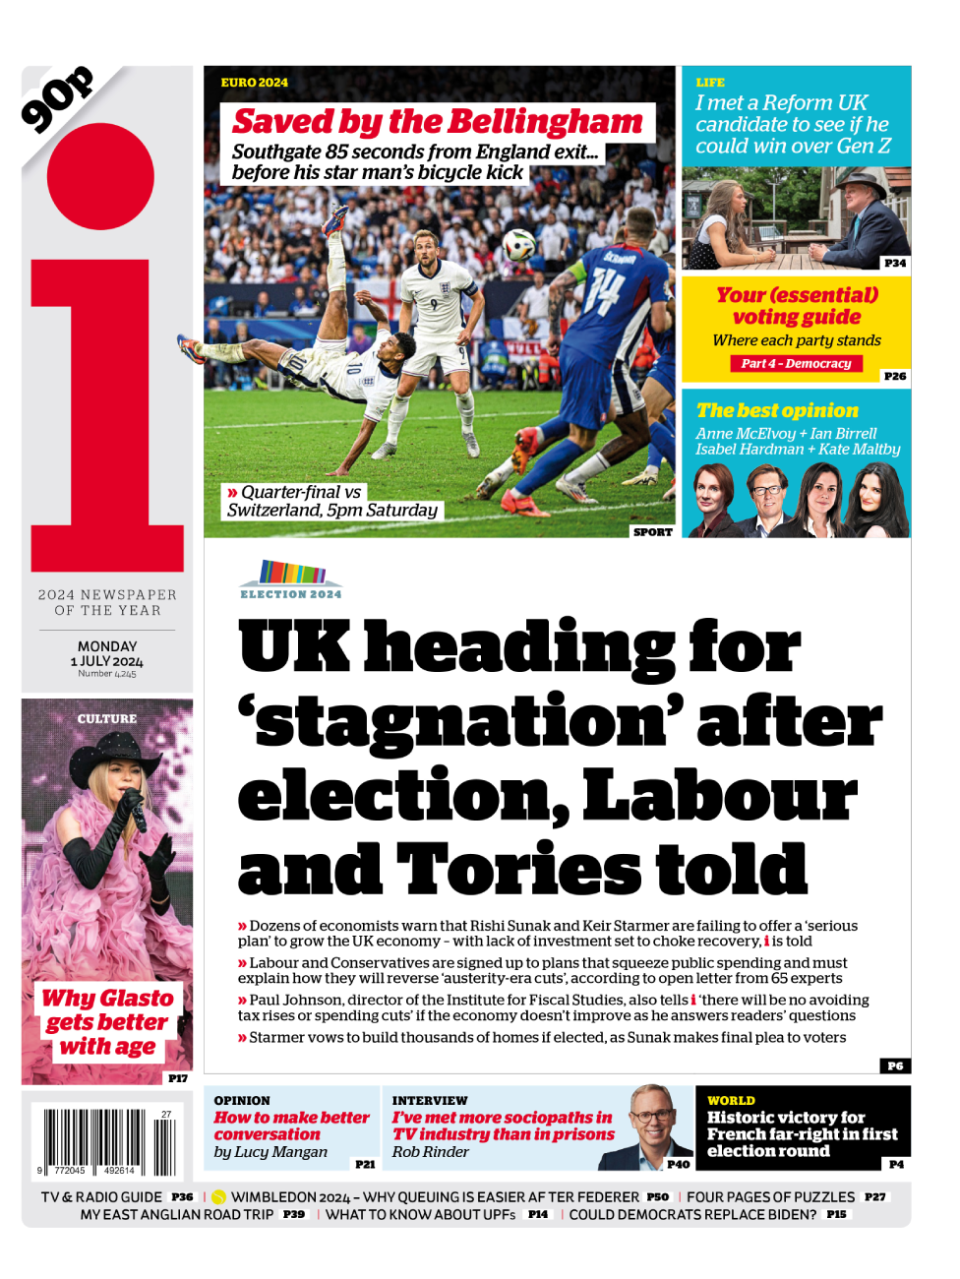 The headline on the front page of the i reads: “UK heading for 'stagnation' after election, Labour and Tories told"